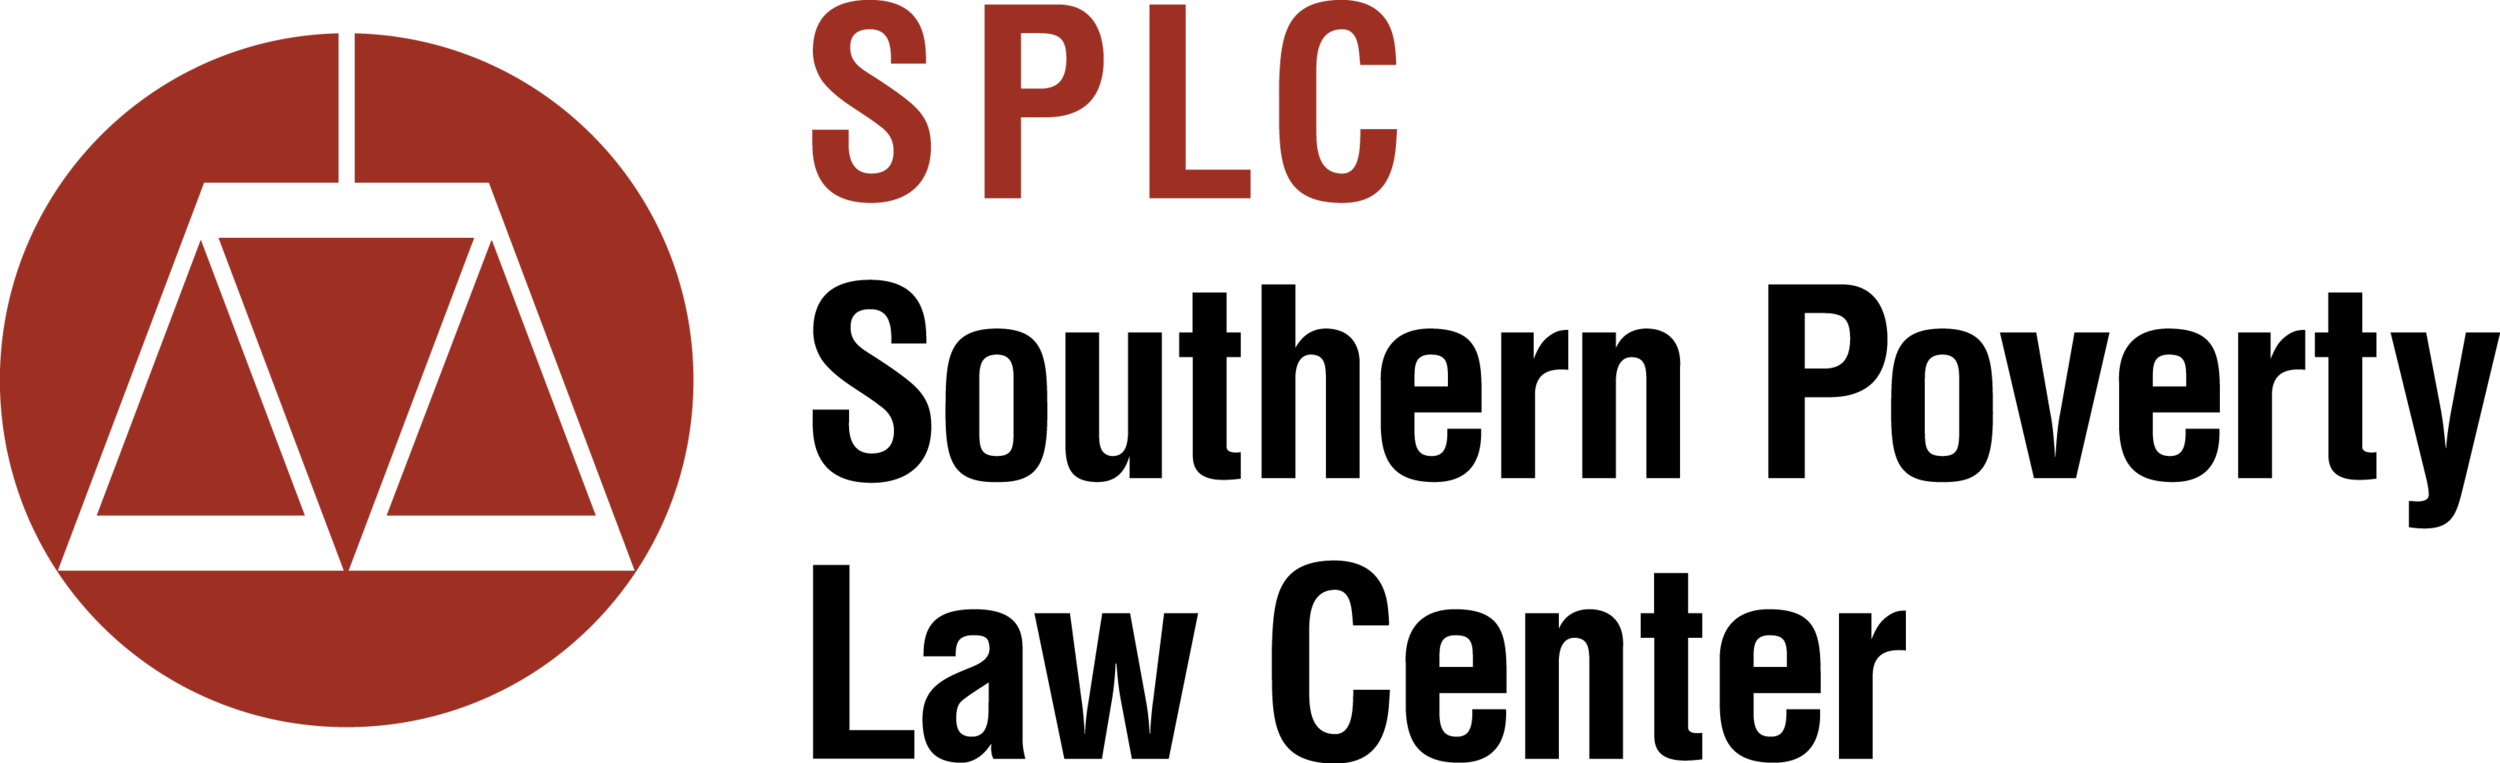 splc_logo_web_stacked.png